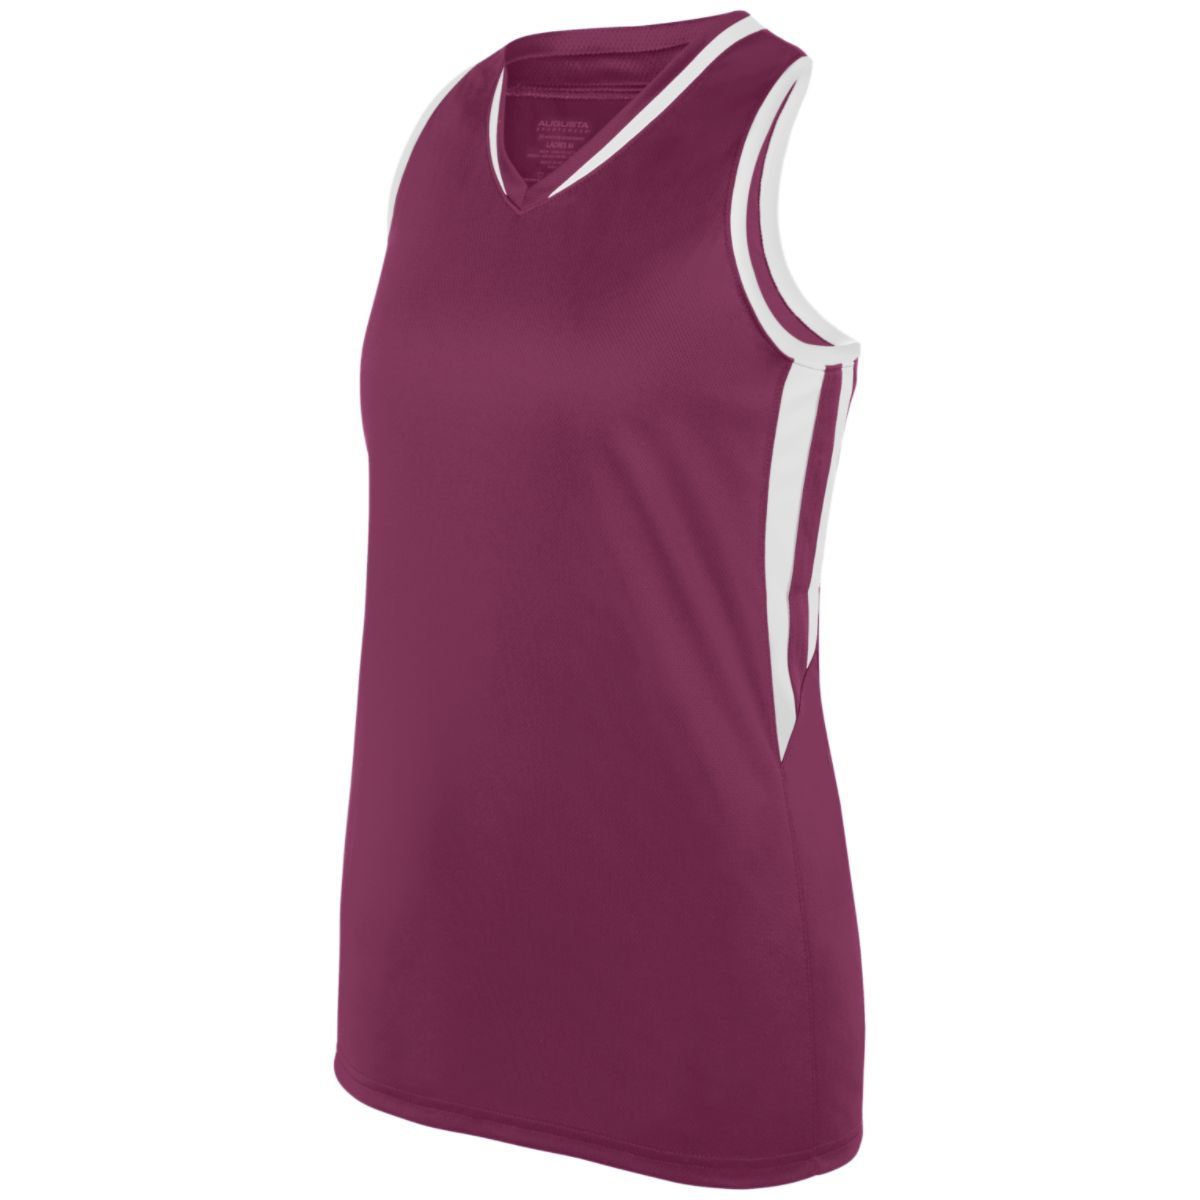 Augusta Sportswear Girls Full Force Tank in Maroon/White  -Part of the Girls, Augusta-Products, Girls-Tank, Shirts product lines at KanaleyCreations.com